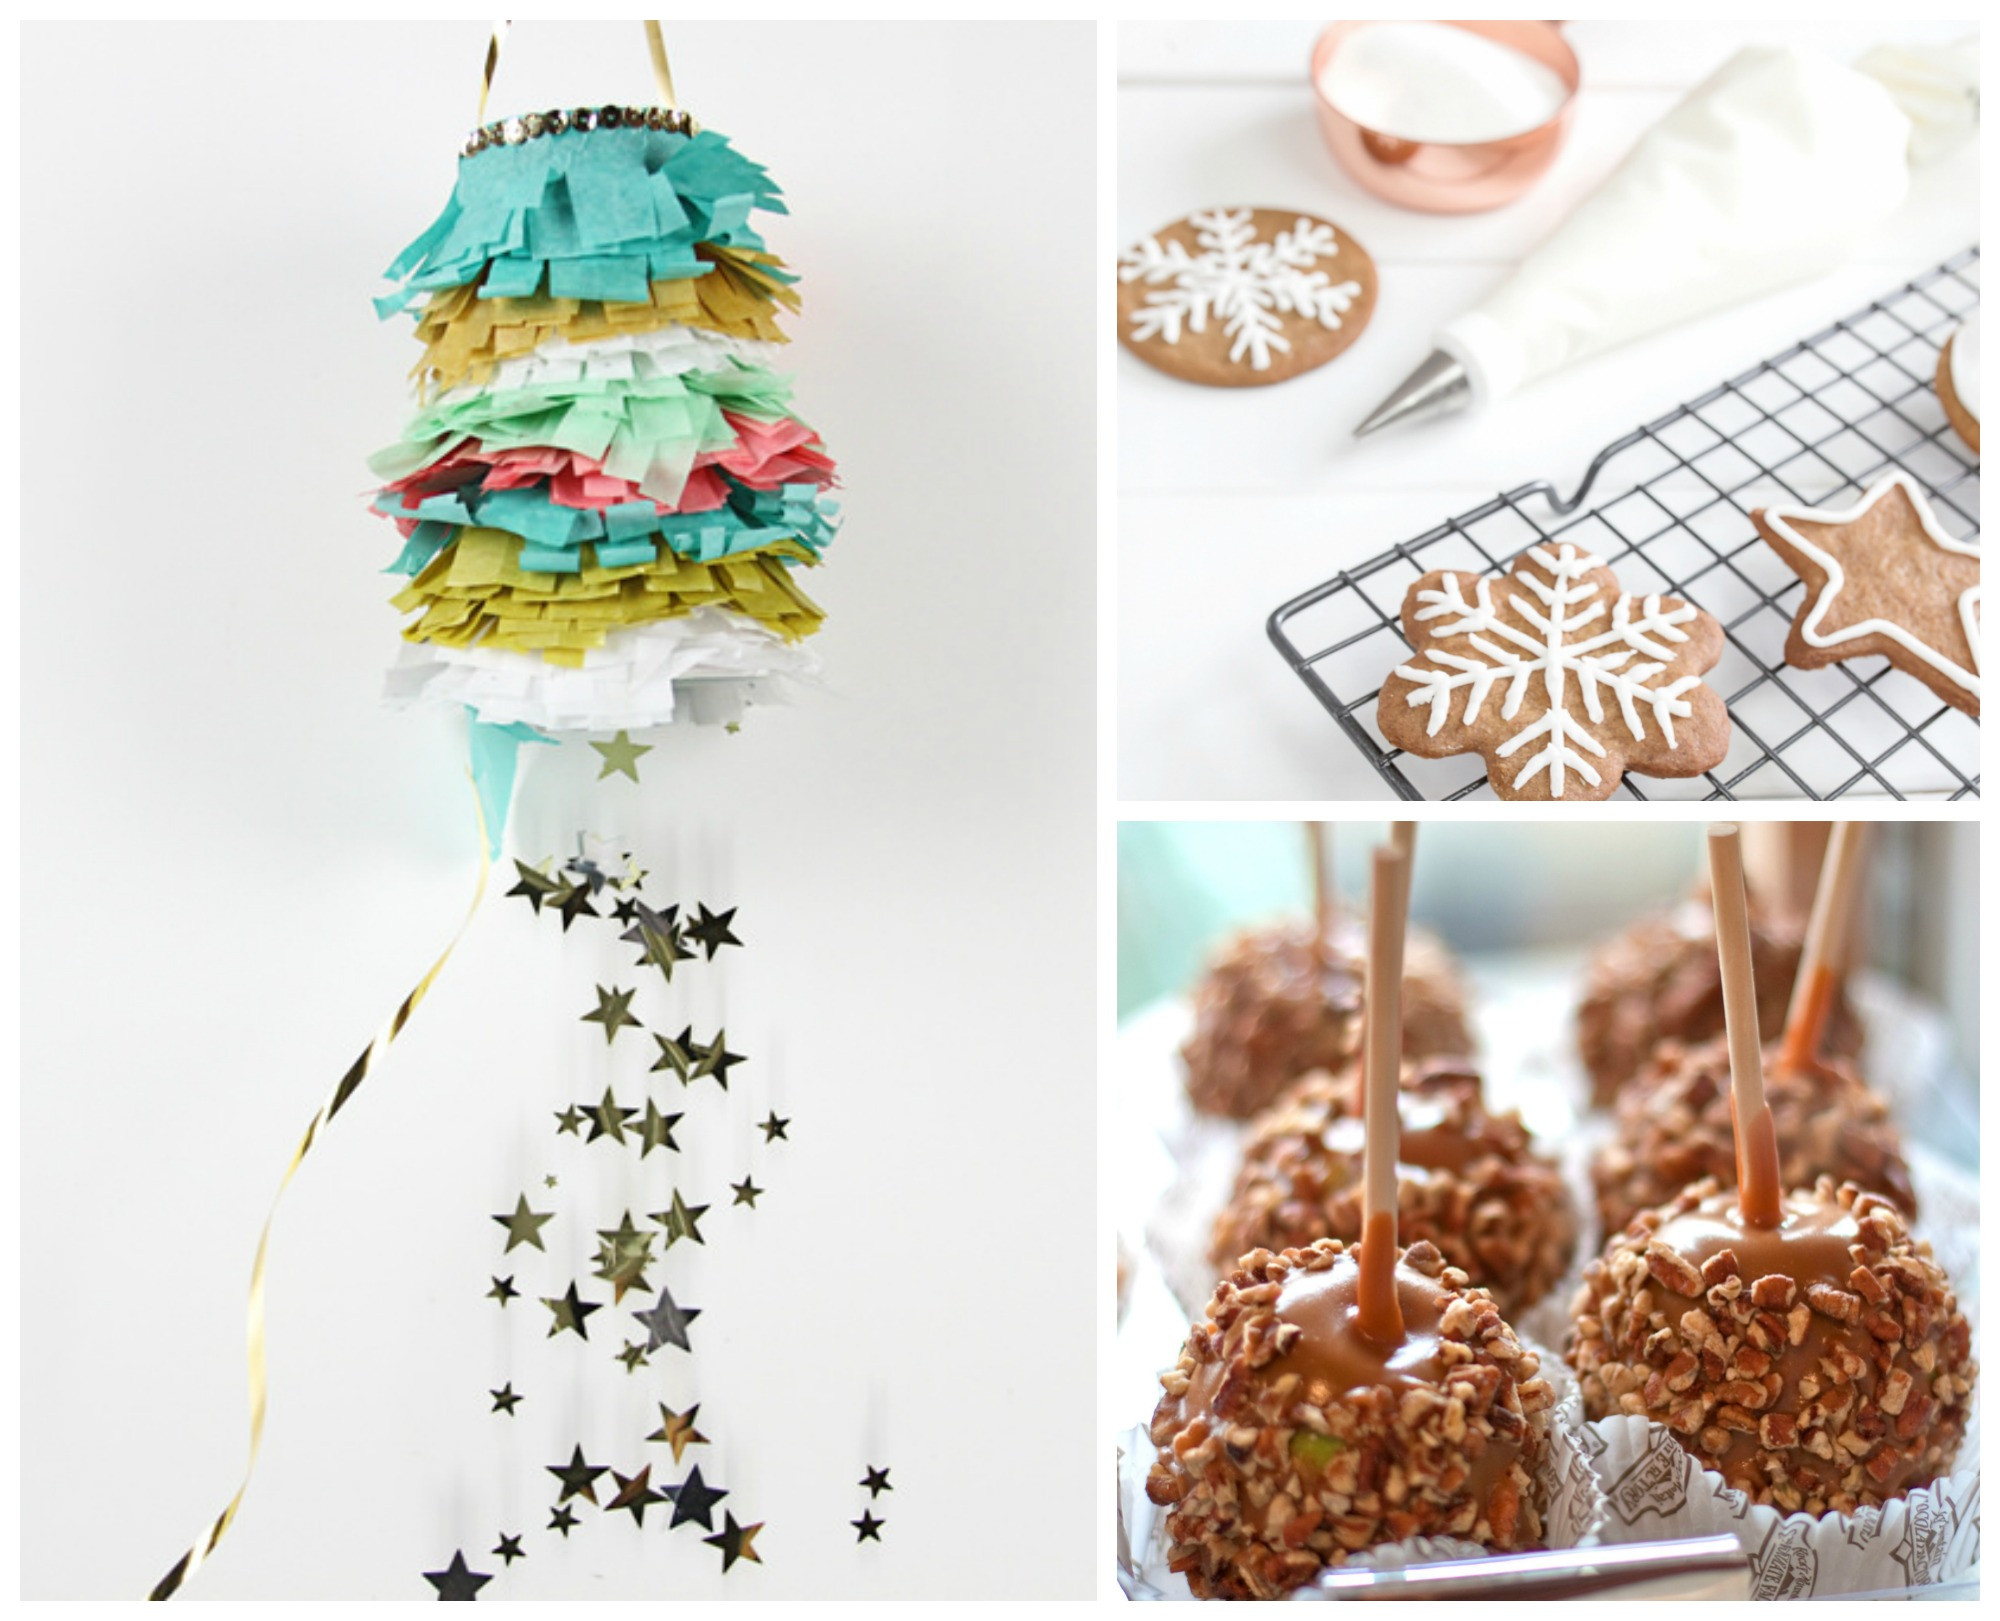 Awesome Christmas Party Ideas
 11 Awesome Bud Friendly Christmas Party Ideas